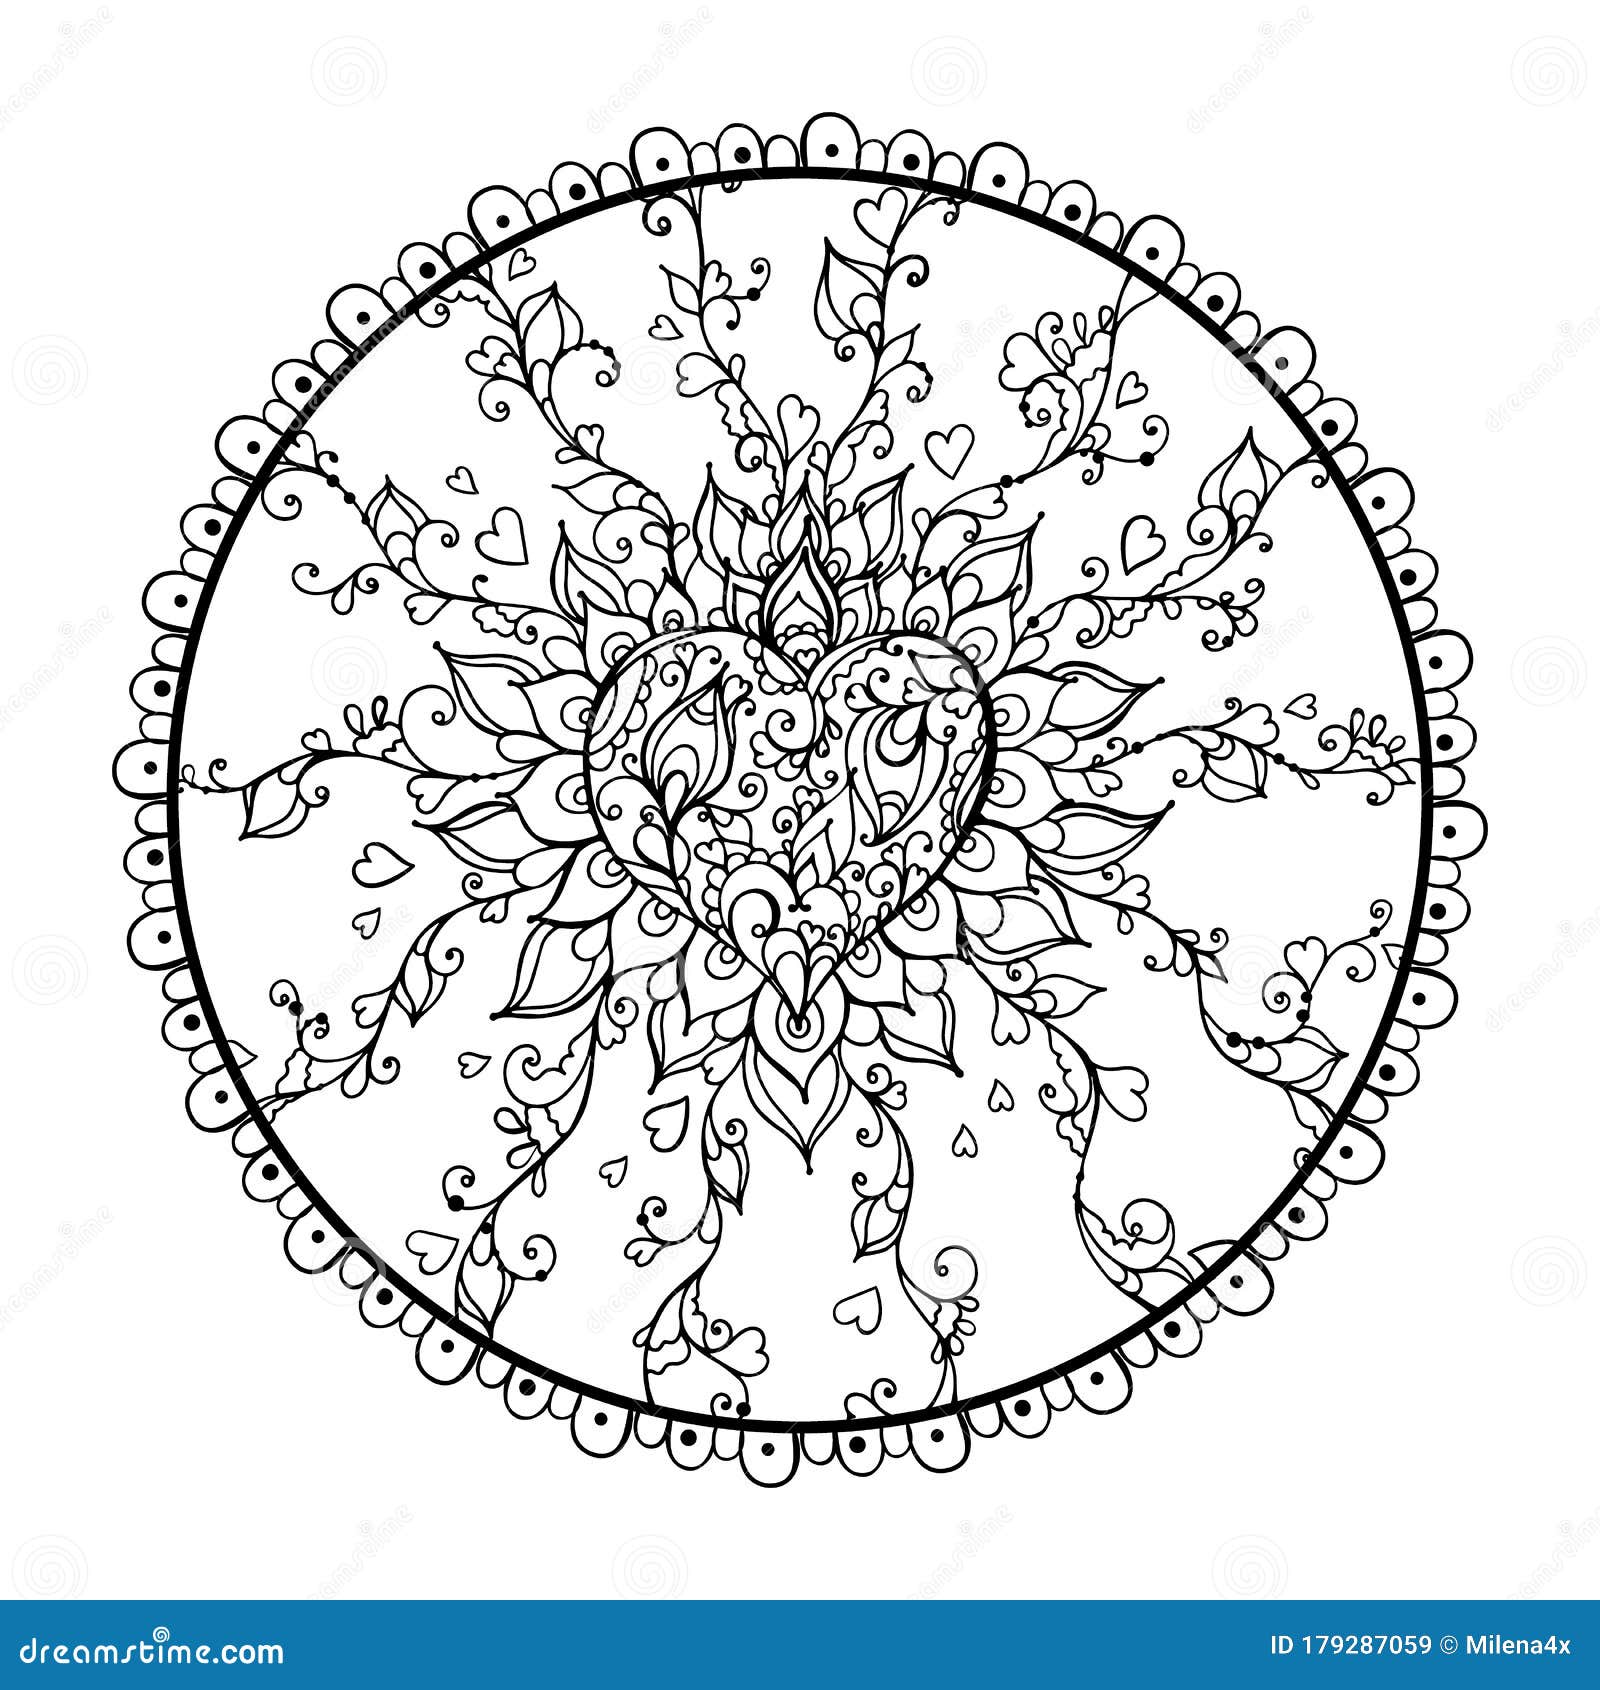 Mandala art for meditation color therapy adult coloring pages stress relief and relaxation heart for valentines day stock vector